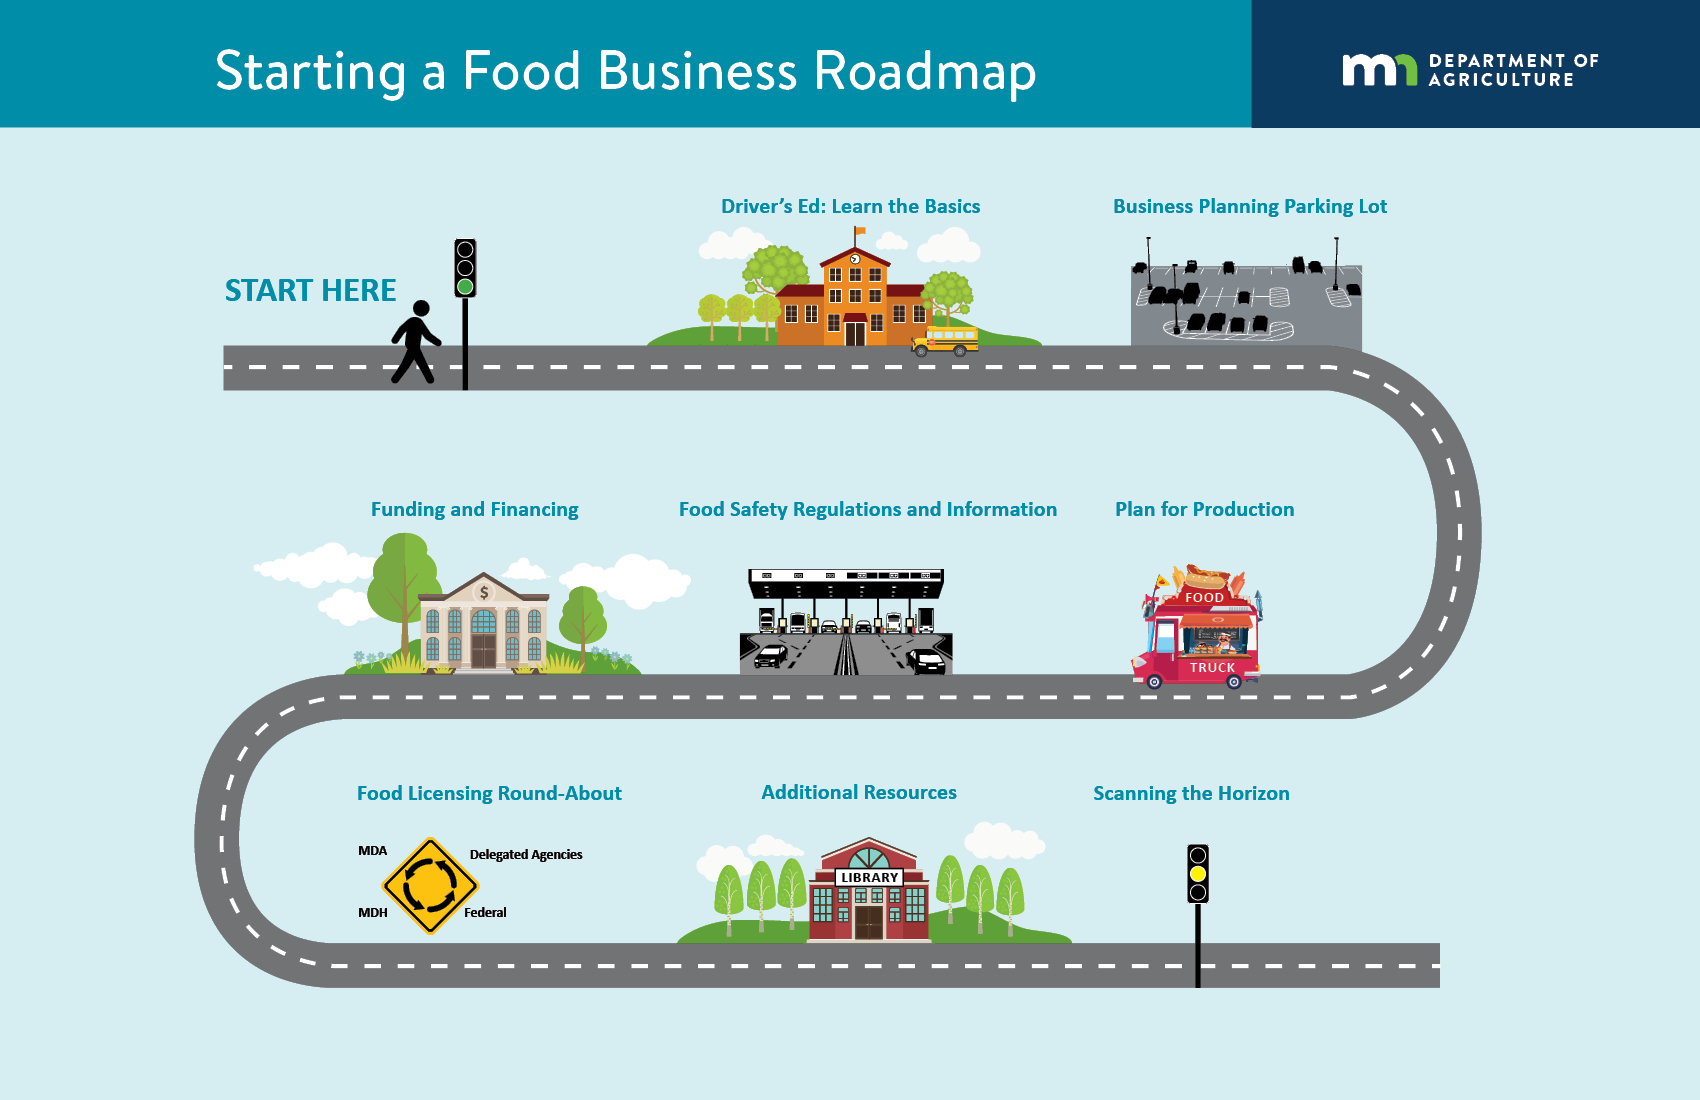 Food business roadmap graphic